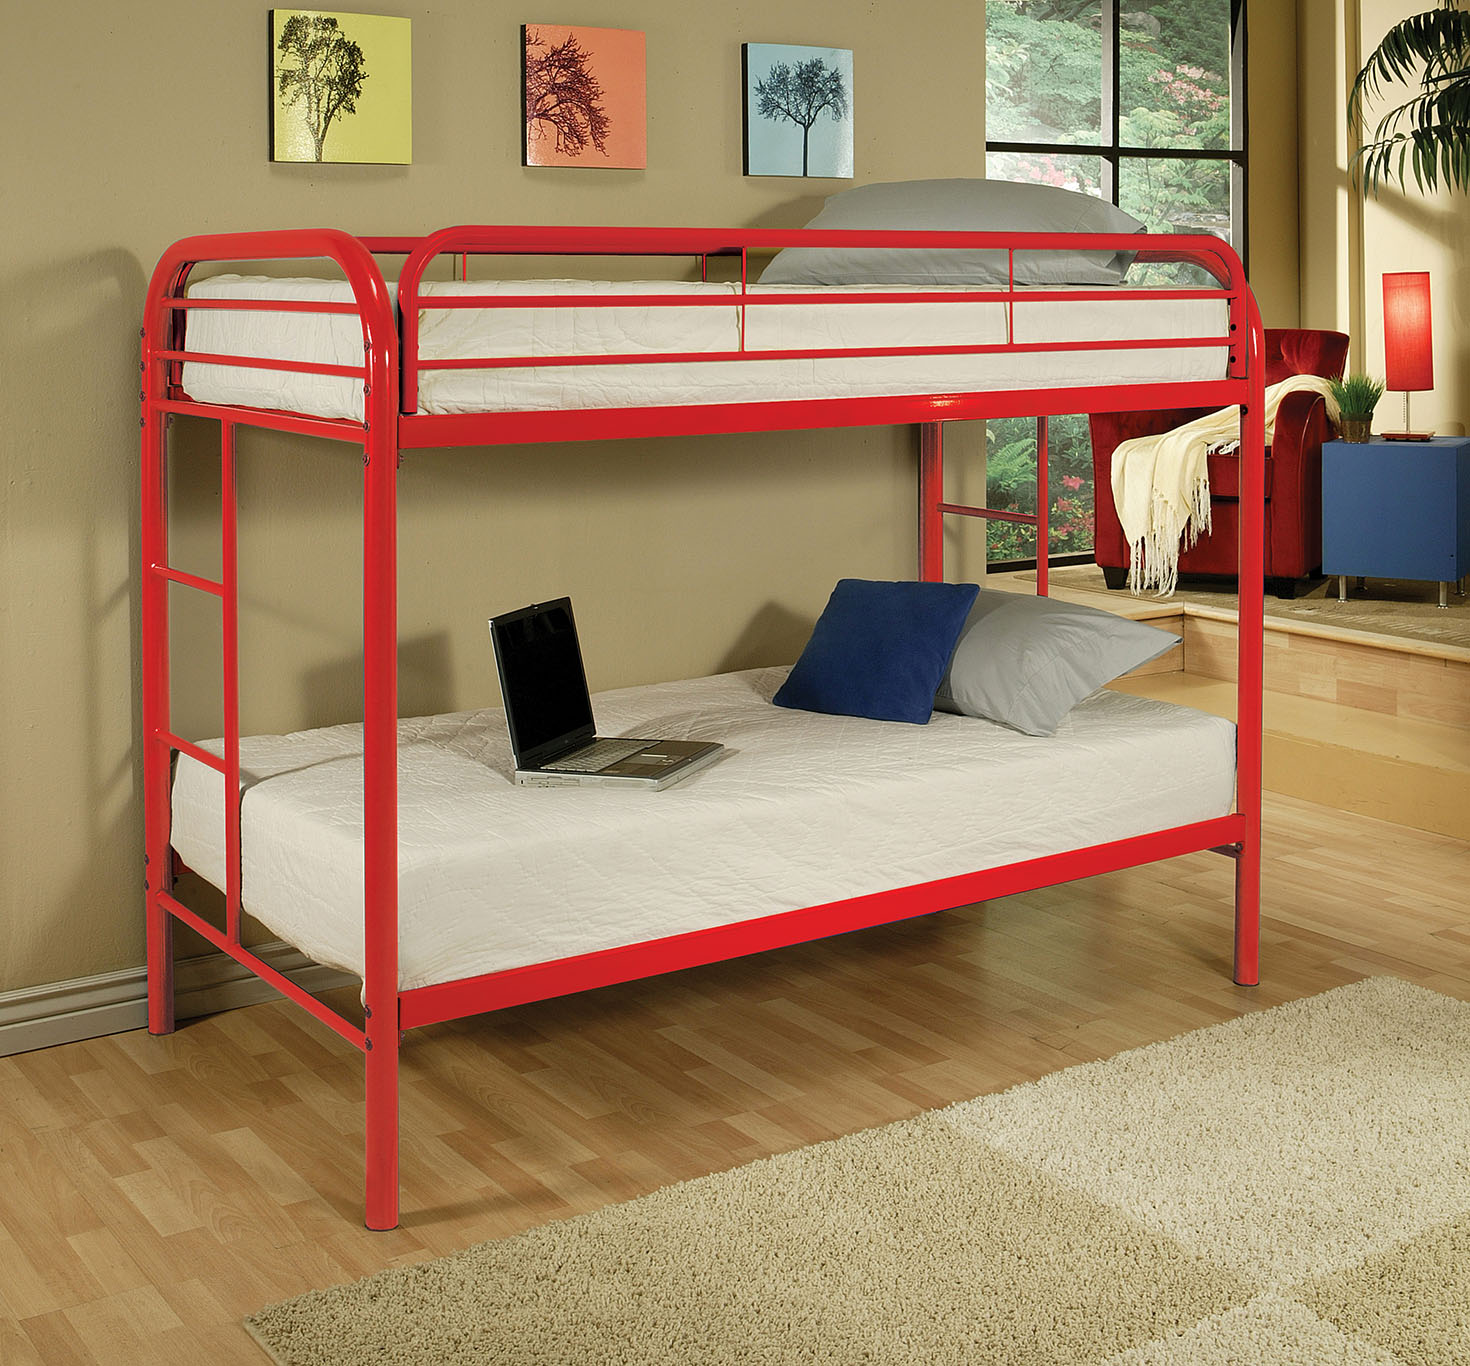 78" X 41" X 60" Twin Over Twin Red Metal Tube Bunk Bed